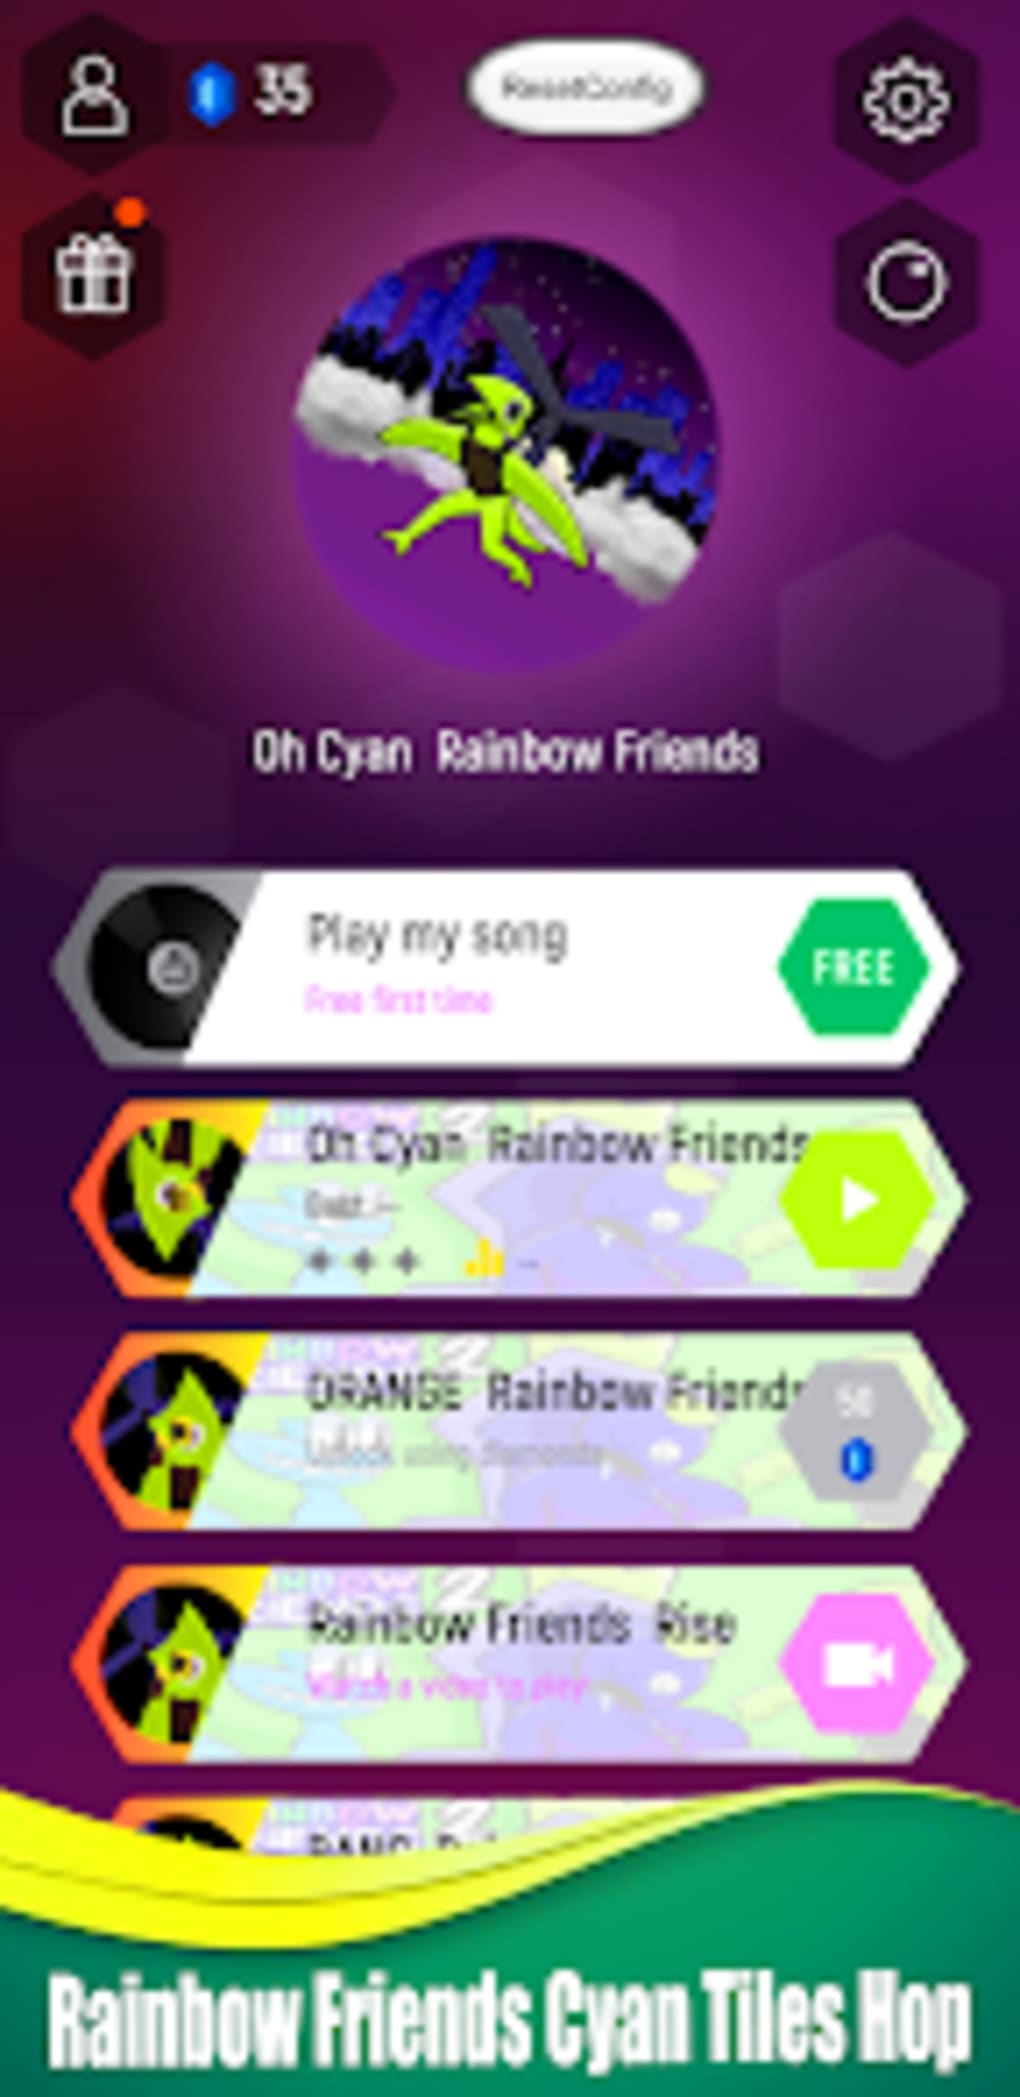 Yellow Rainbow Friend TilesHop para Android - Download